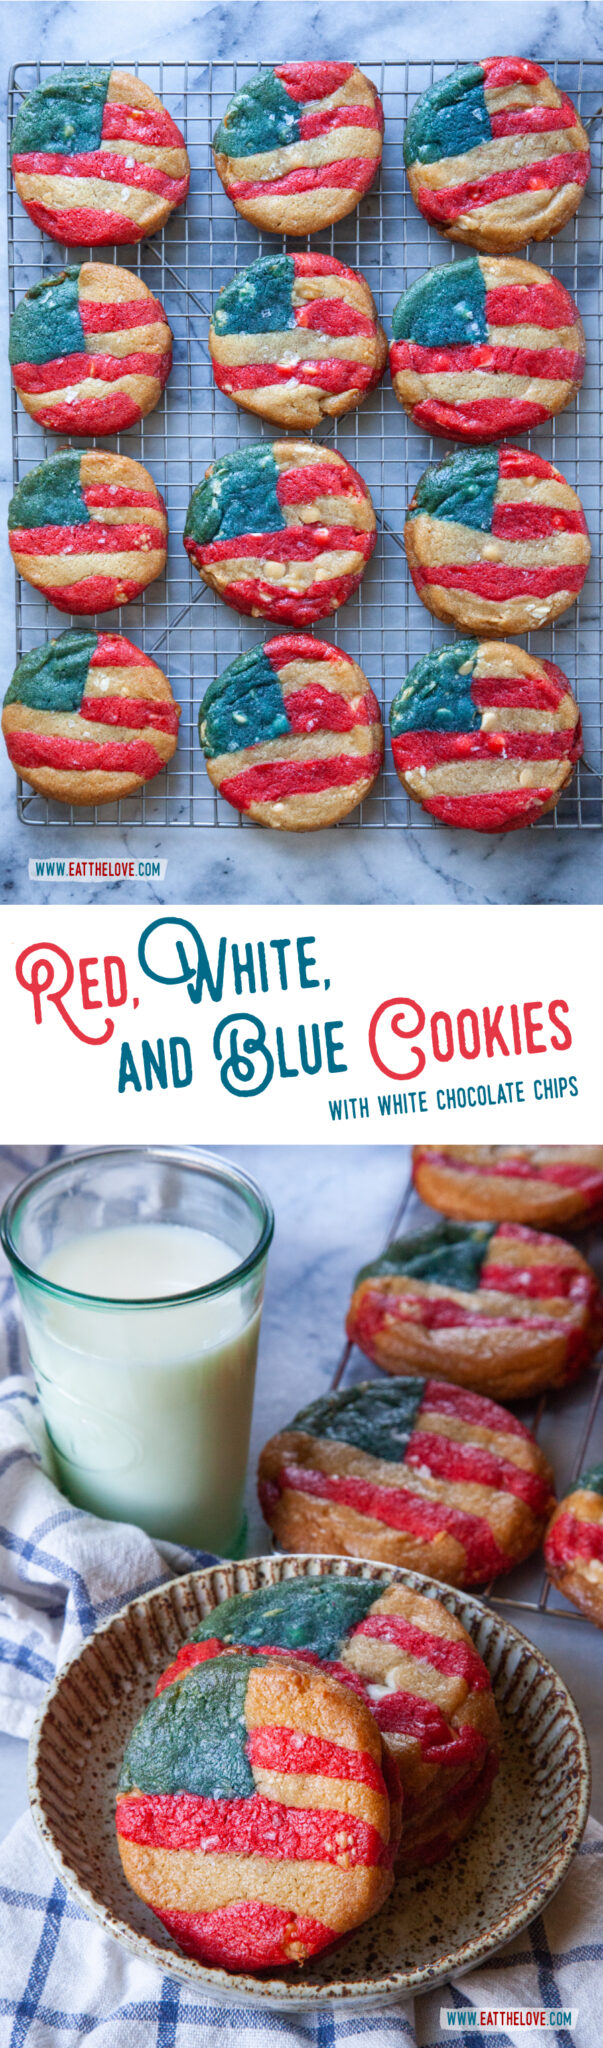 Top image is a red, white, and blue American flag-inspired cookies sitting on a wire cooling rack. Bottom image is red, white, and blue cookies on a plate, with more cookies on a wire rack and a glass of milk behind the plate.